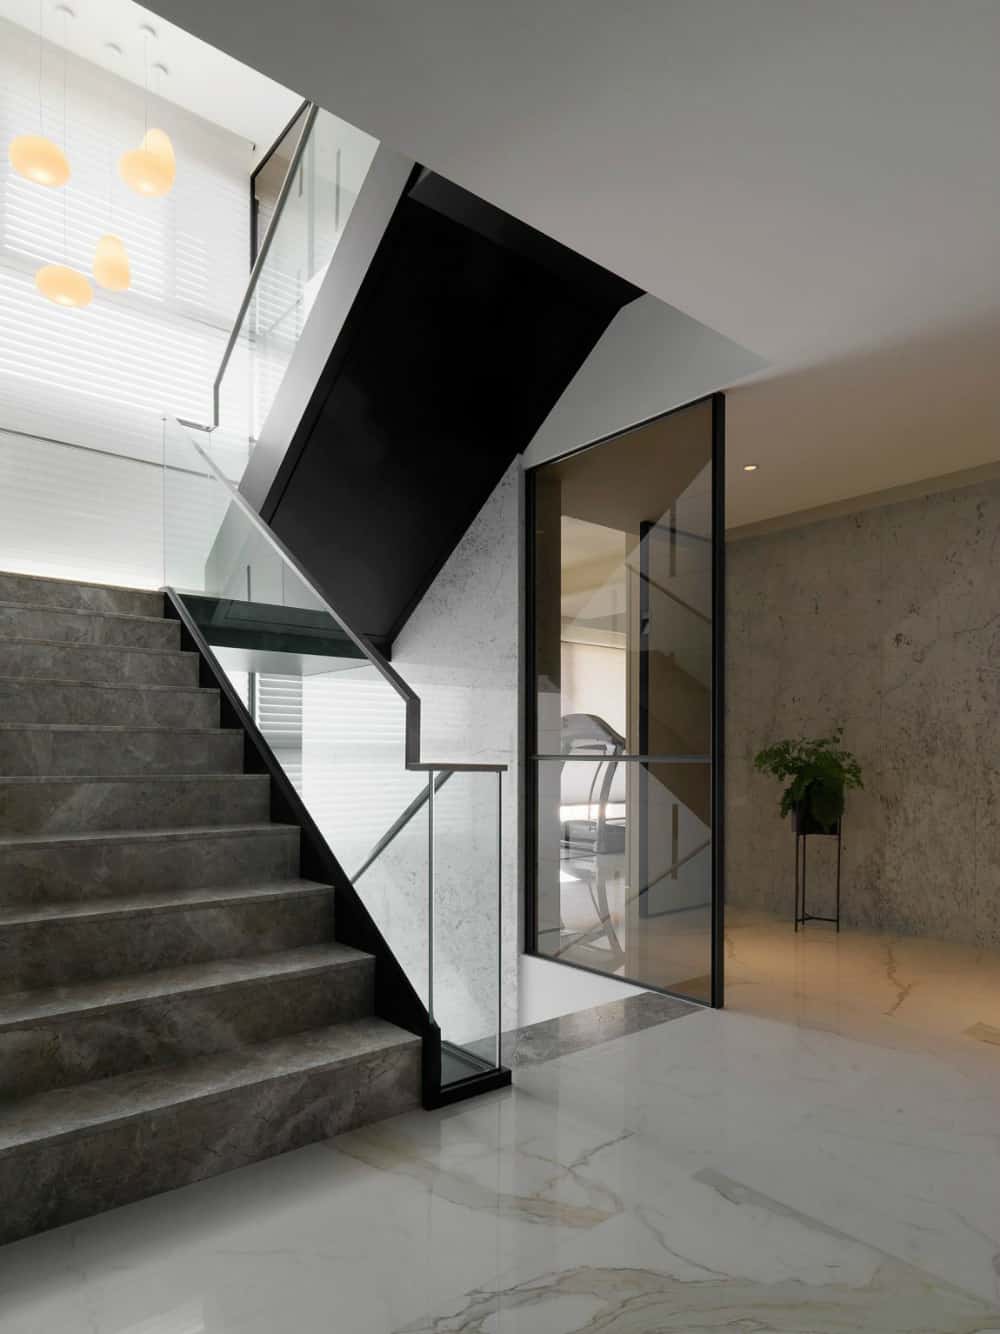 Staircase comes with glass railings